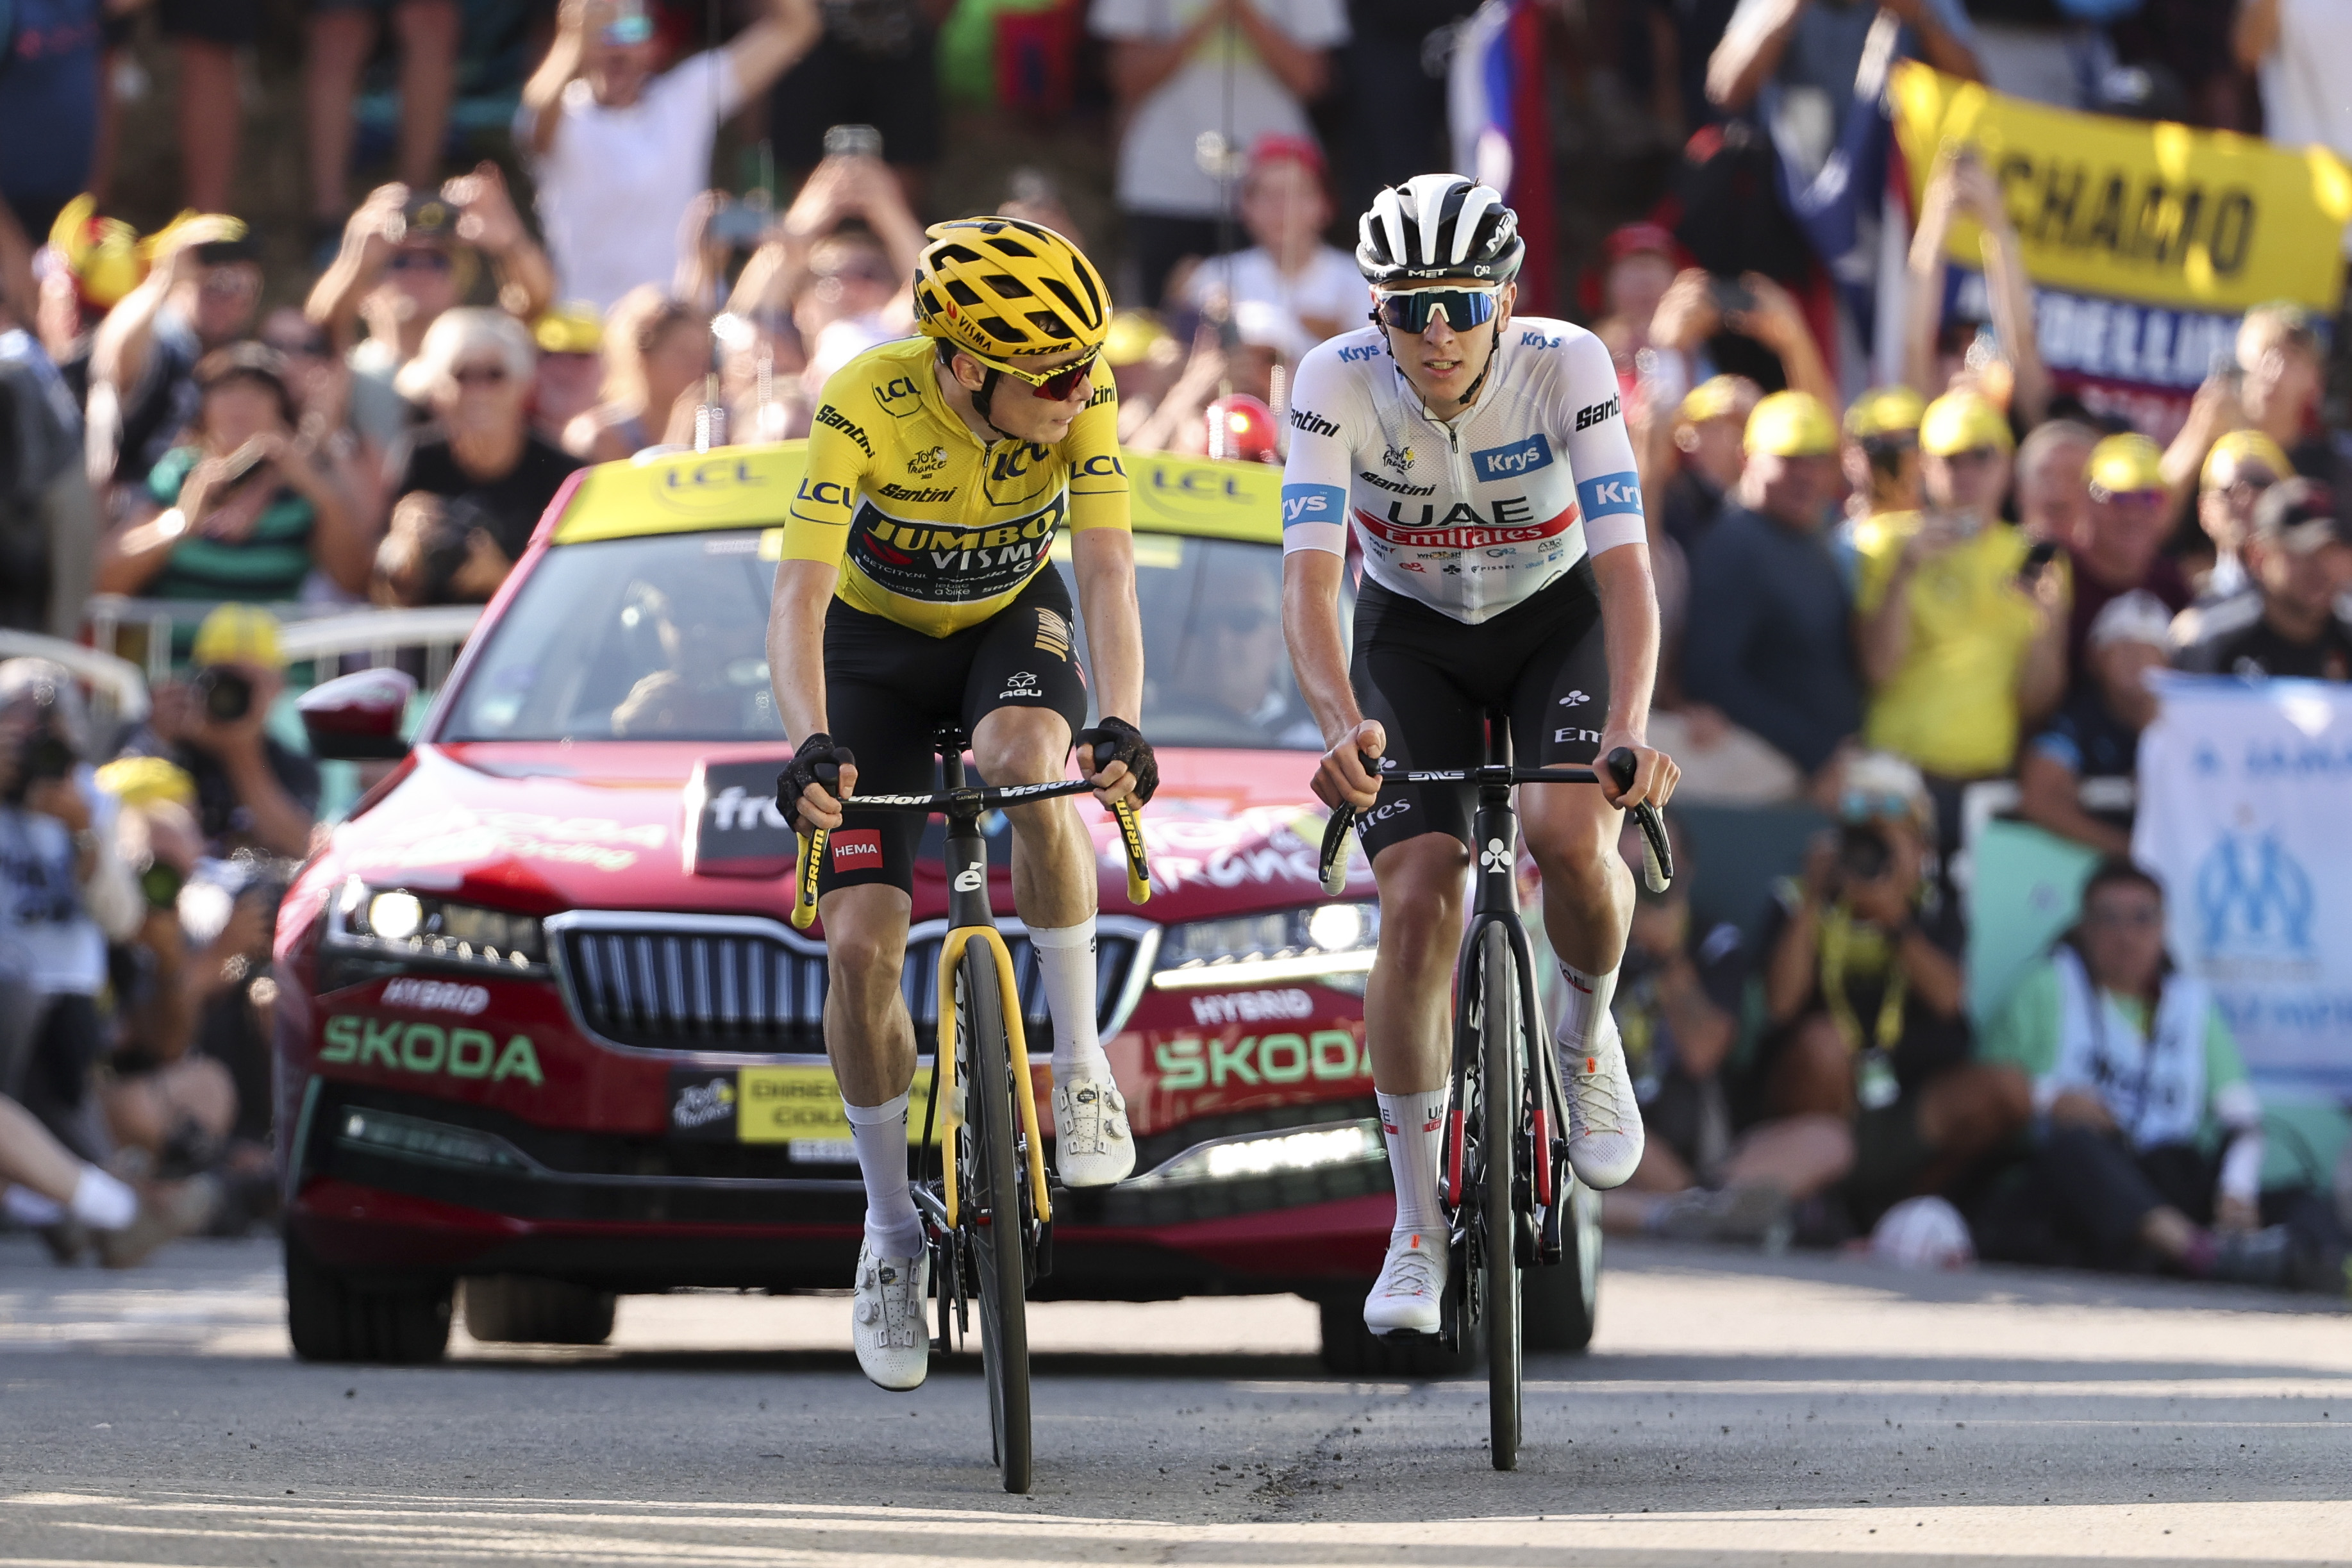 Yellow jersey, race leader Jonas Vingegaard of Denmark and Jumbo - Visma and White jersey of best young rider Tadej Pogacar of Slovenia and UAE Team Emirates cross the finish line of stage fifteen of the 110th Tour de France 2023, a 179km stage from Les Gets les Portes du Soleil to Saint-Gervais Mont-Blanc 1379m / #UCIWT / on July 16, 2023 in Saint-Gervais Mont-Blanc, France.